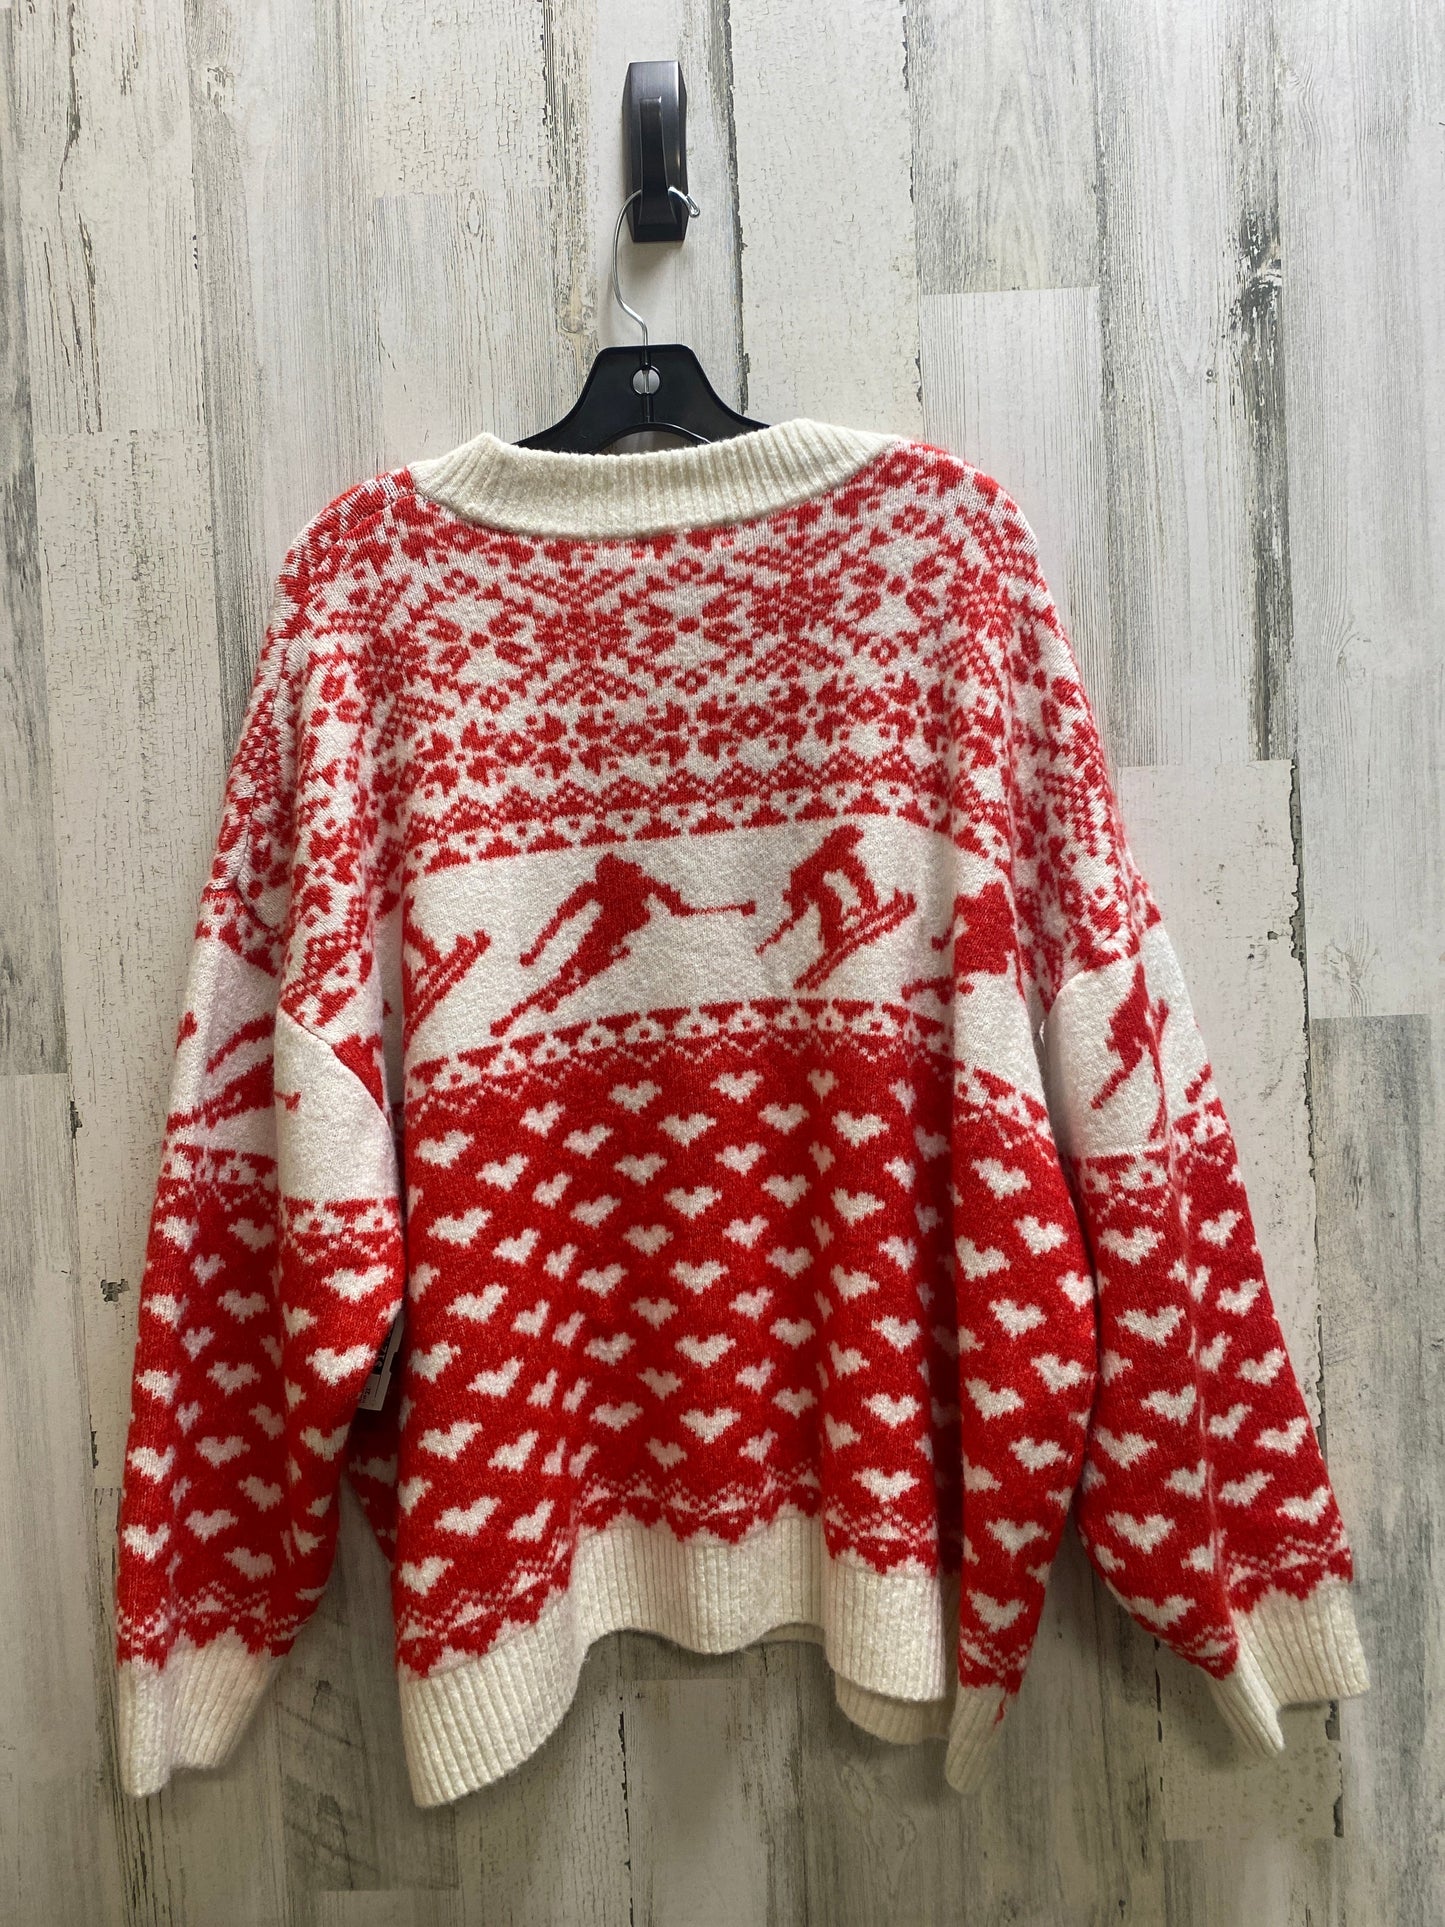 Sweater By H&m  Size: 2x